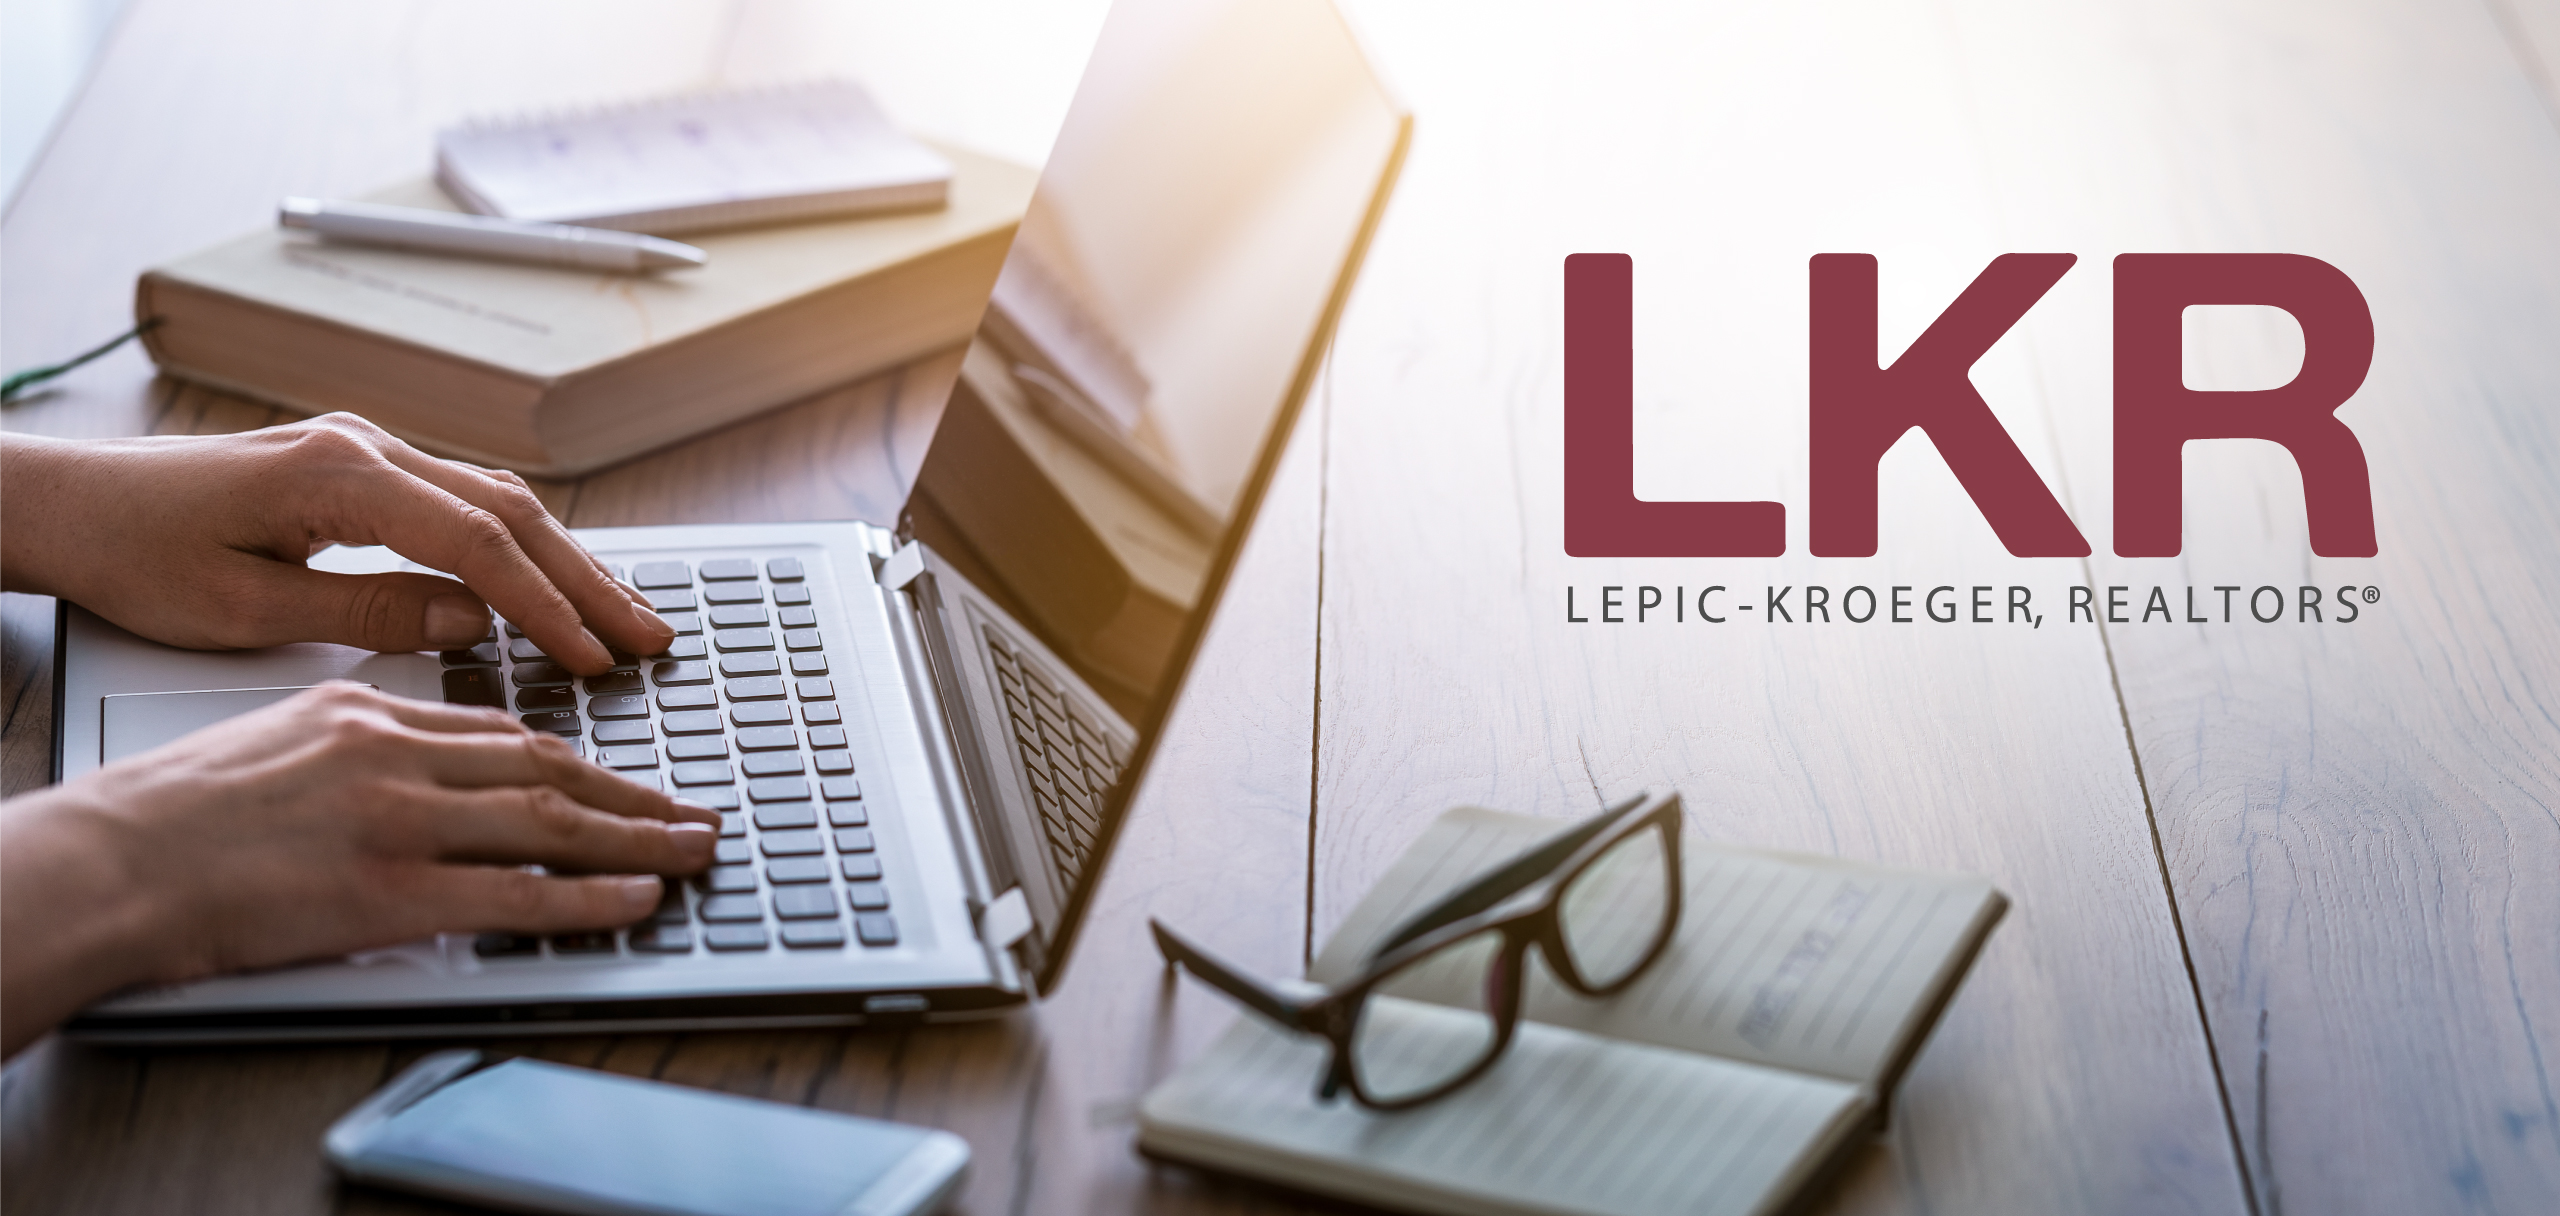 Hands typing on a laptop with the LKR logo